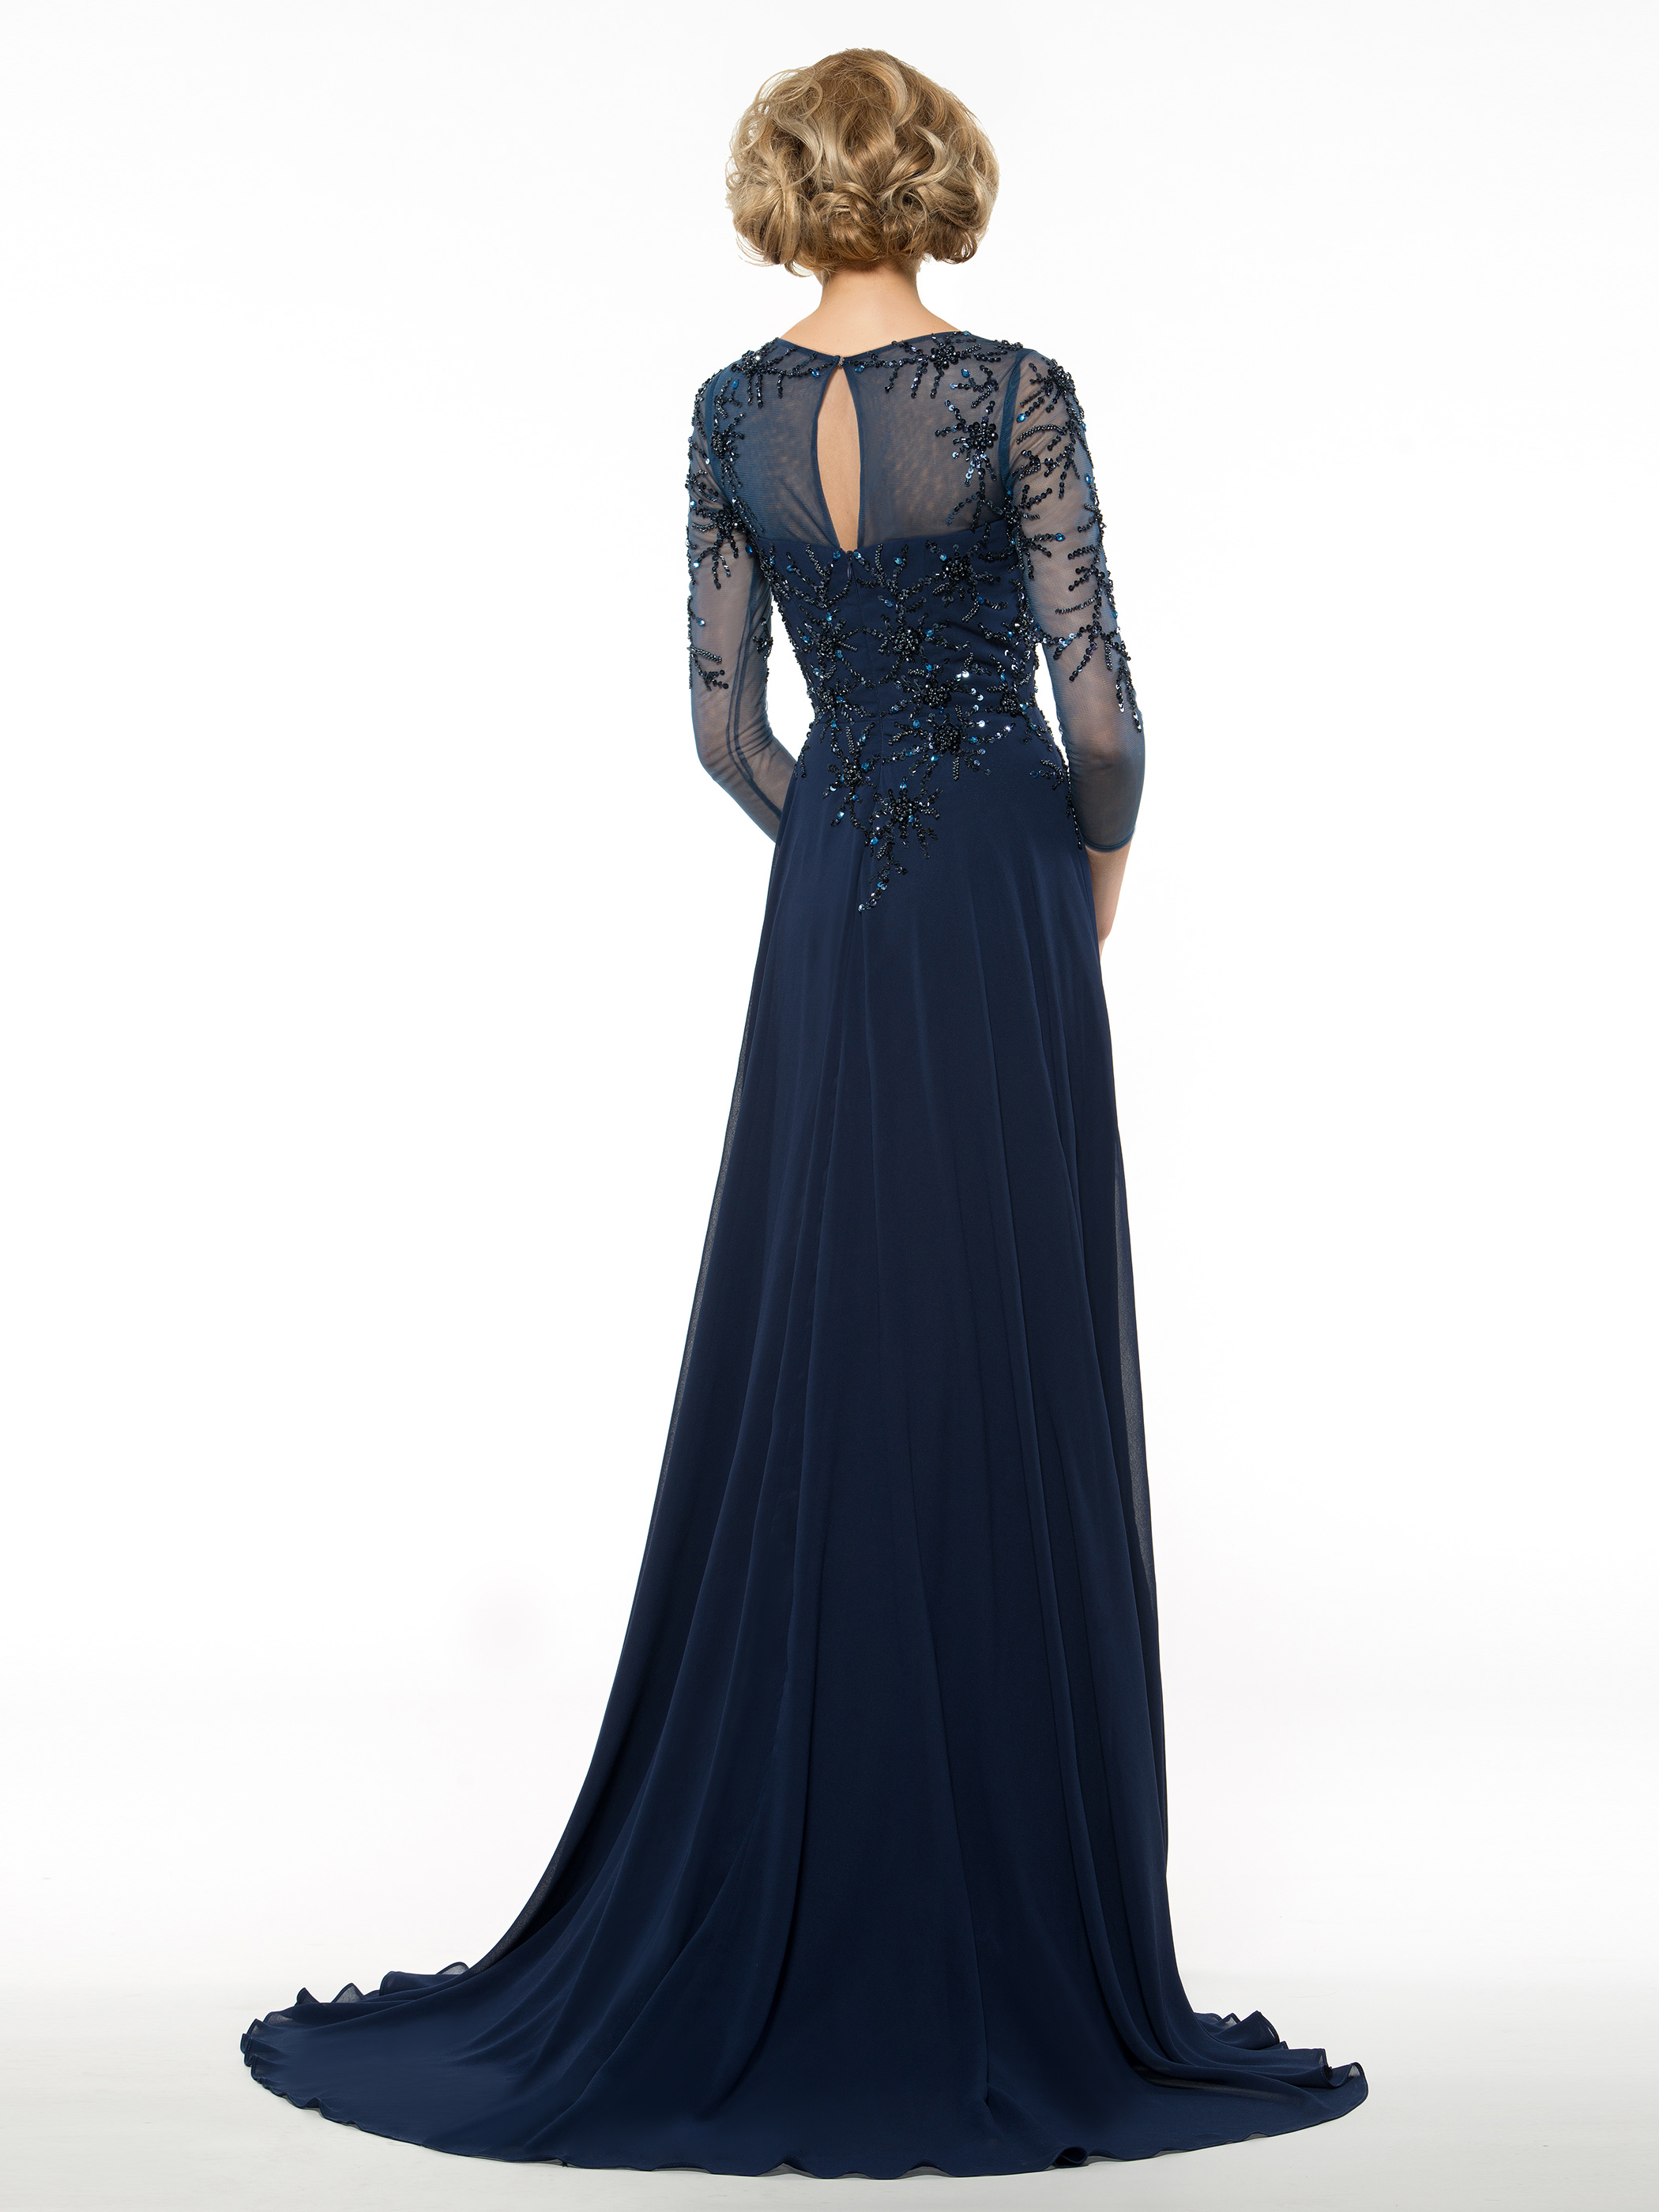 Long Navy Blue Mother Of The Bride Dresses Chiffon Beaded Appliques Bodice Sheer 3/4 Sleeves Mothers Evening Dresses 